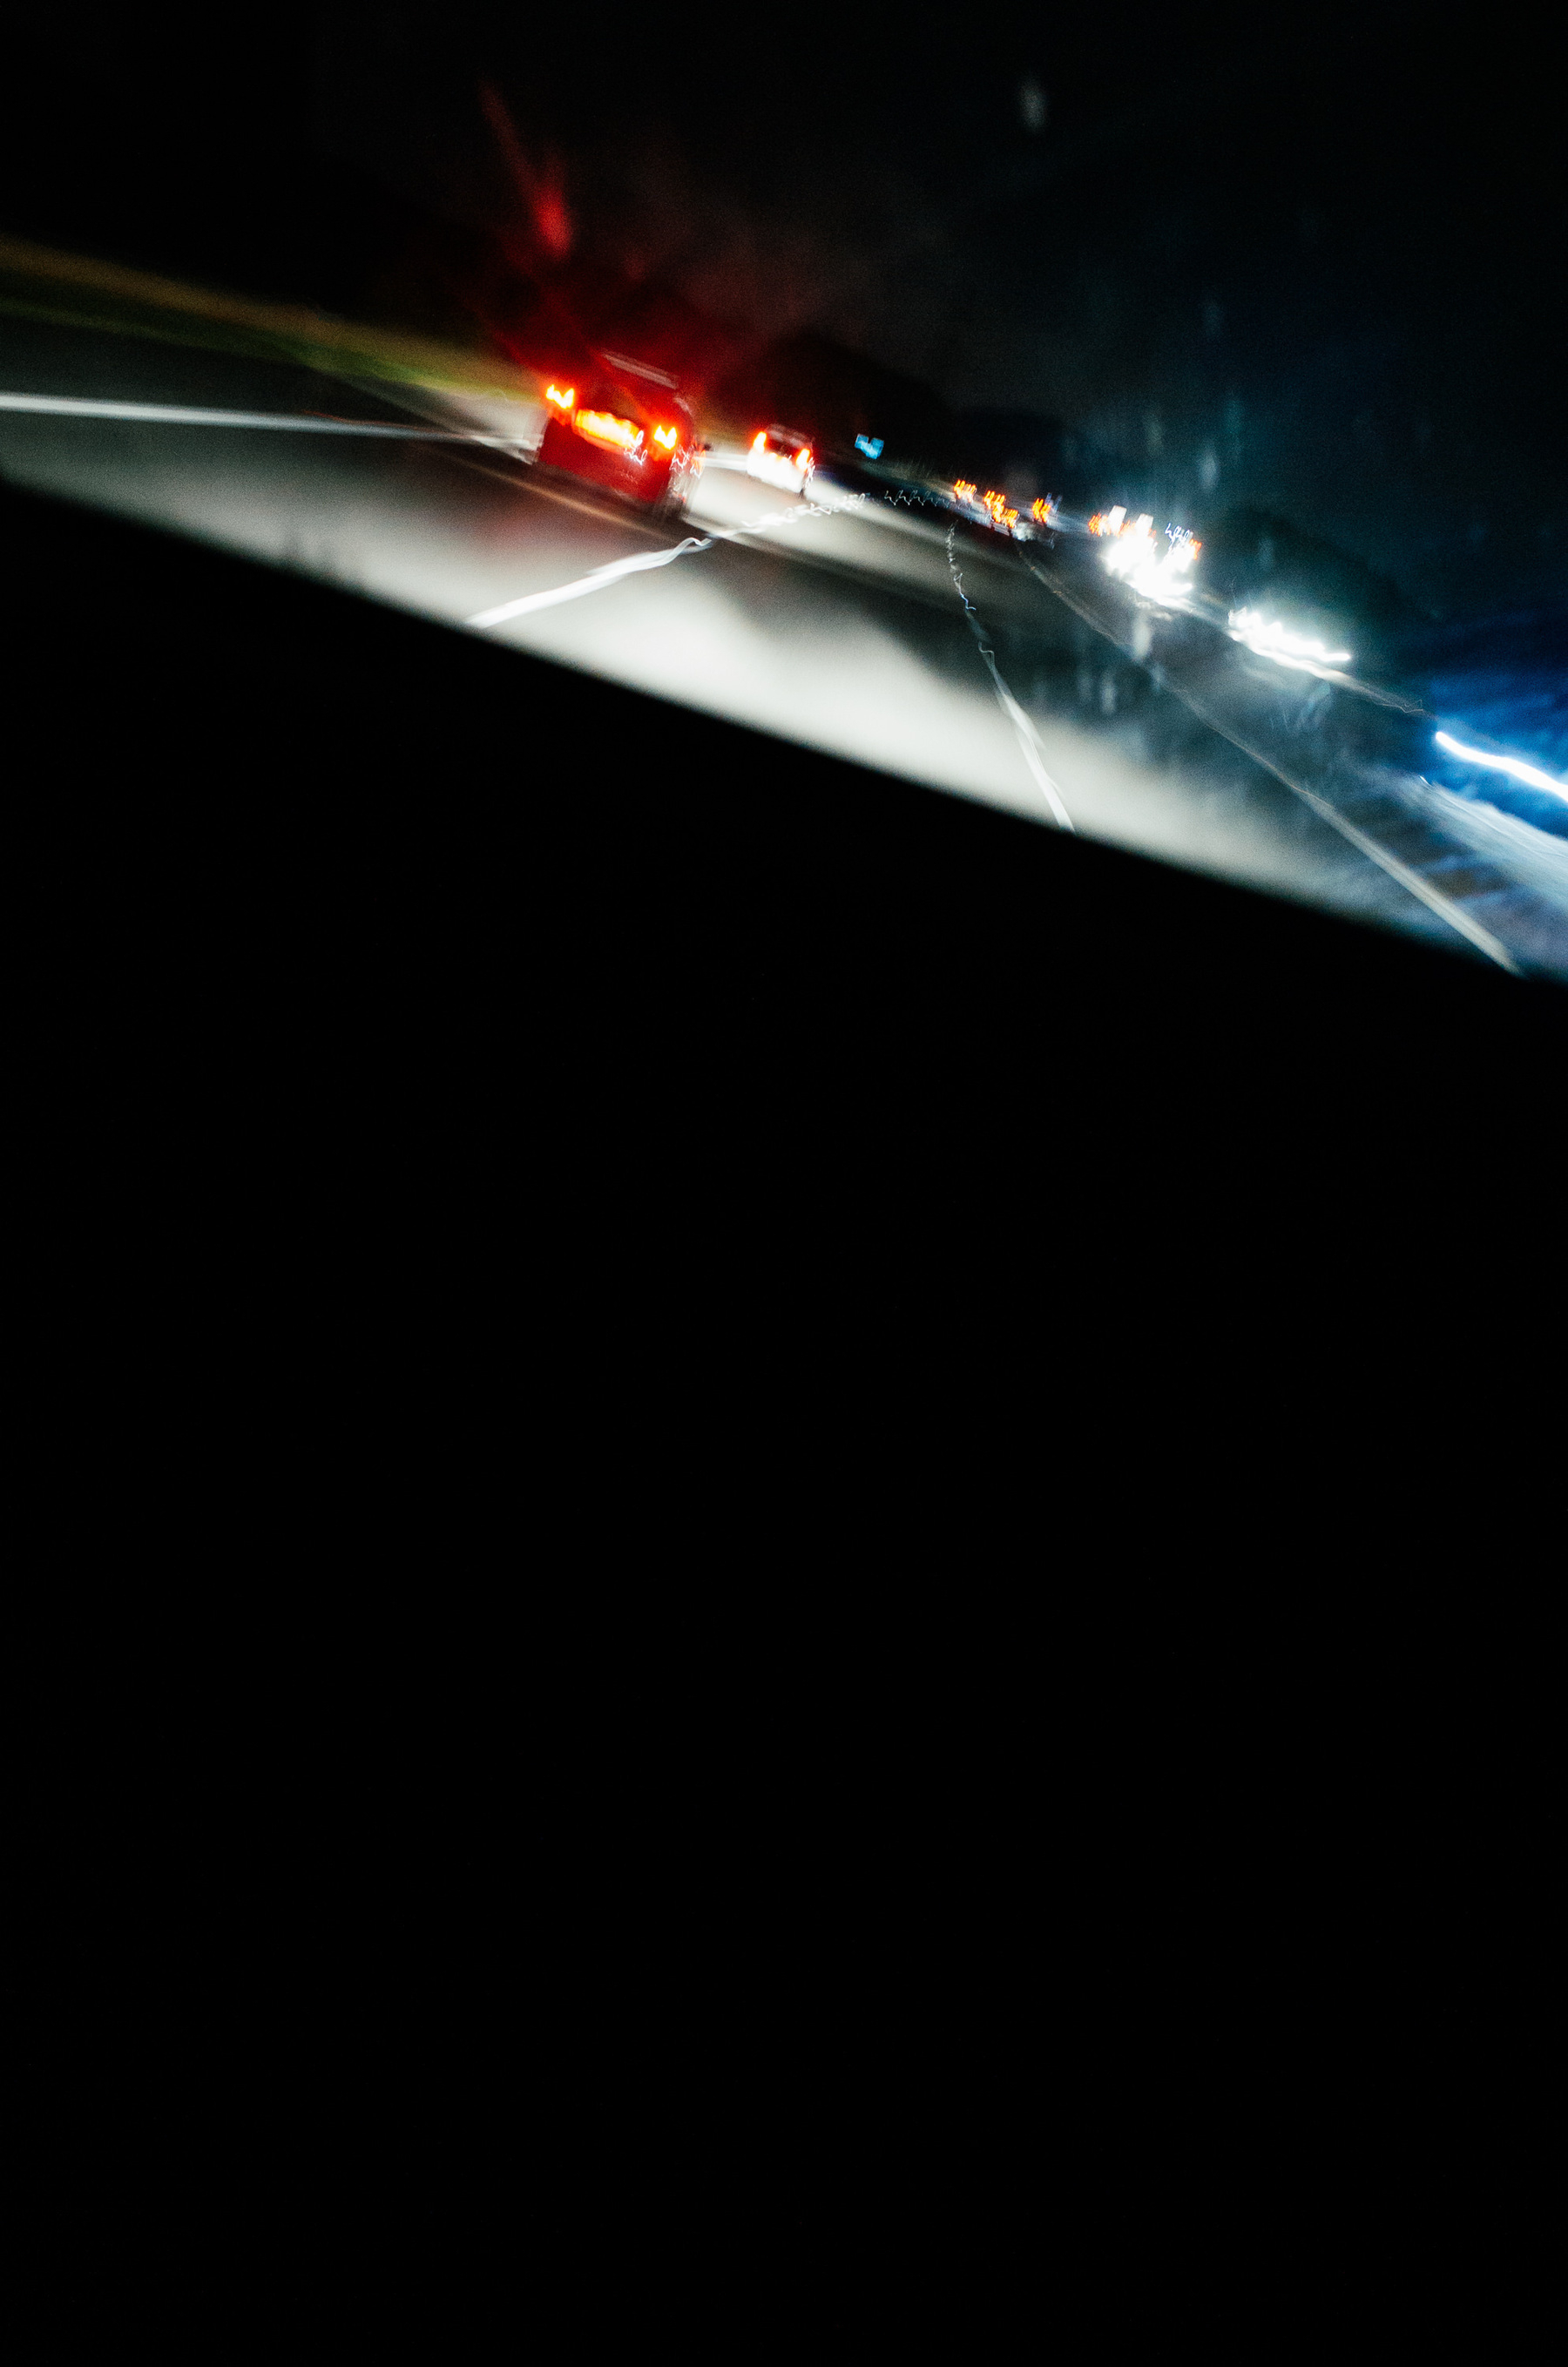 The top fifth of the frame shows cars and their brake lights driving away from the viewer on a motorway, the horizon tilted. You can see oncoming traffic in the top right hand corner. The rest of the image is completely black, obscured by the dashboard of the car that slices down and right from the top left corner of the frame